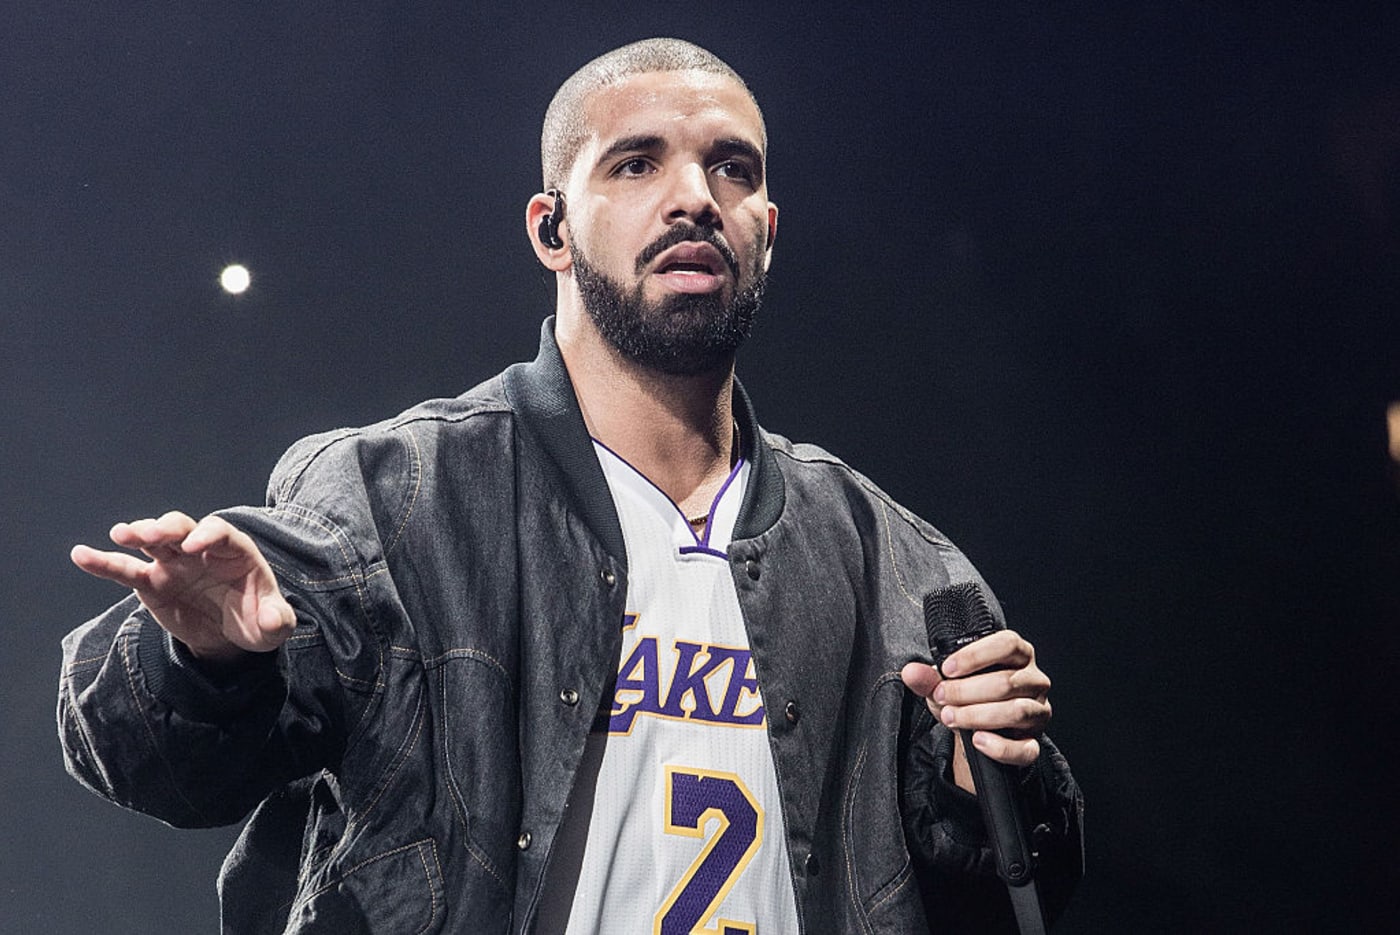 Drake: New Albums, Songs, News, Interviews & Collaborations